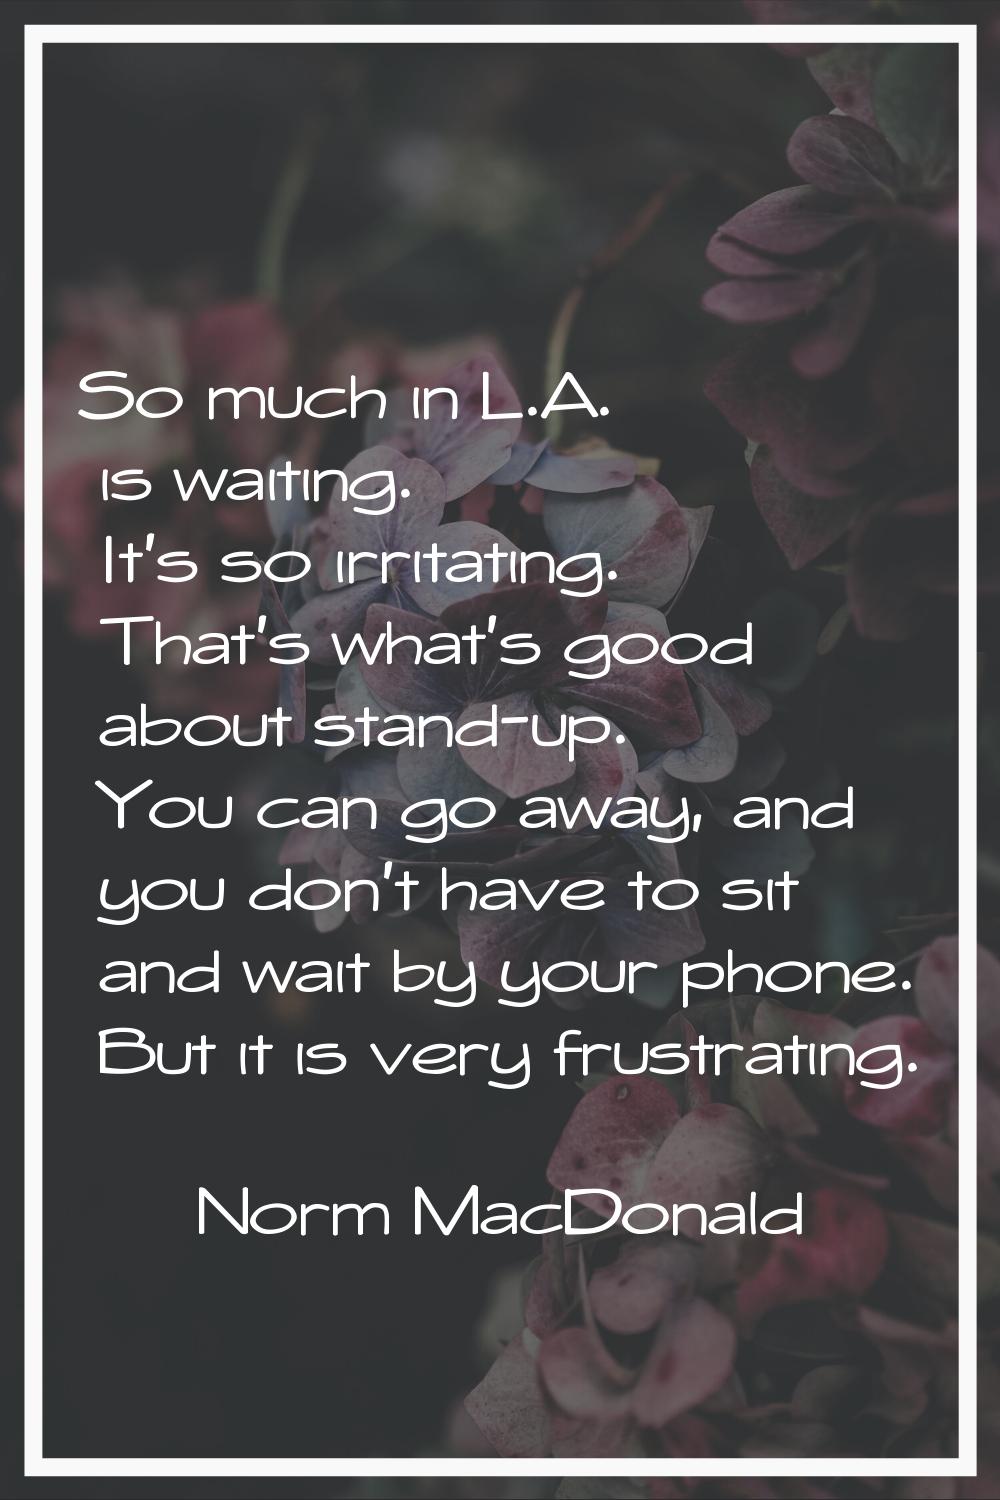 So much in L.A. is waiting. It's so irritating. That's what's good about stand-up. You can go away,